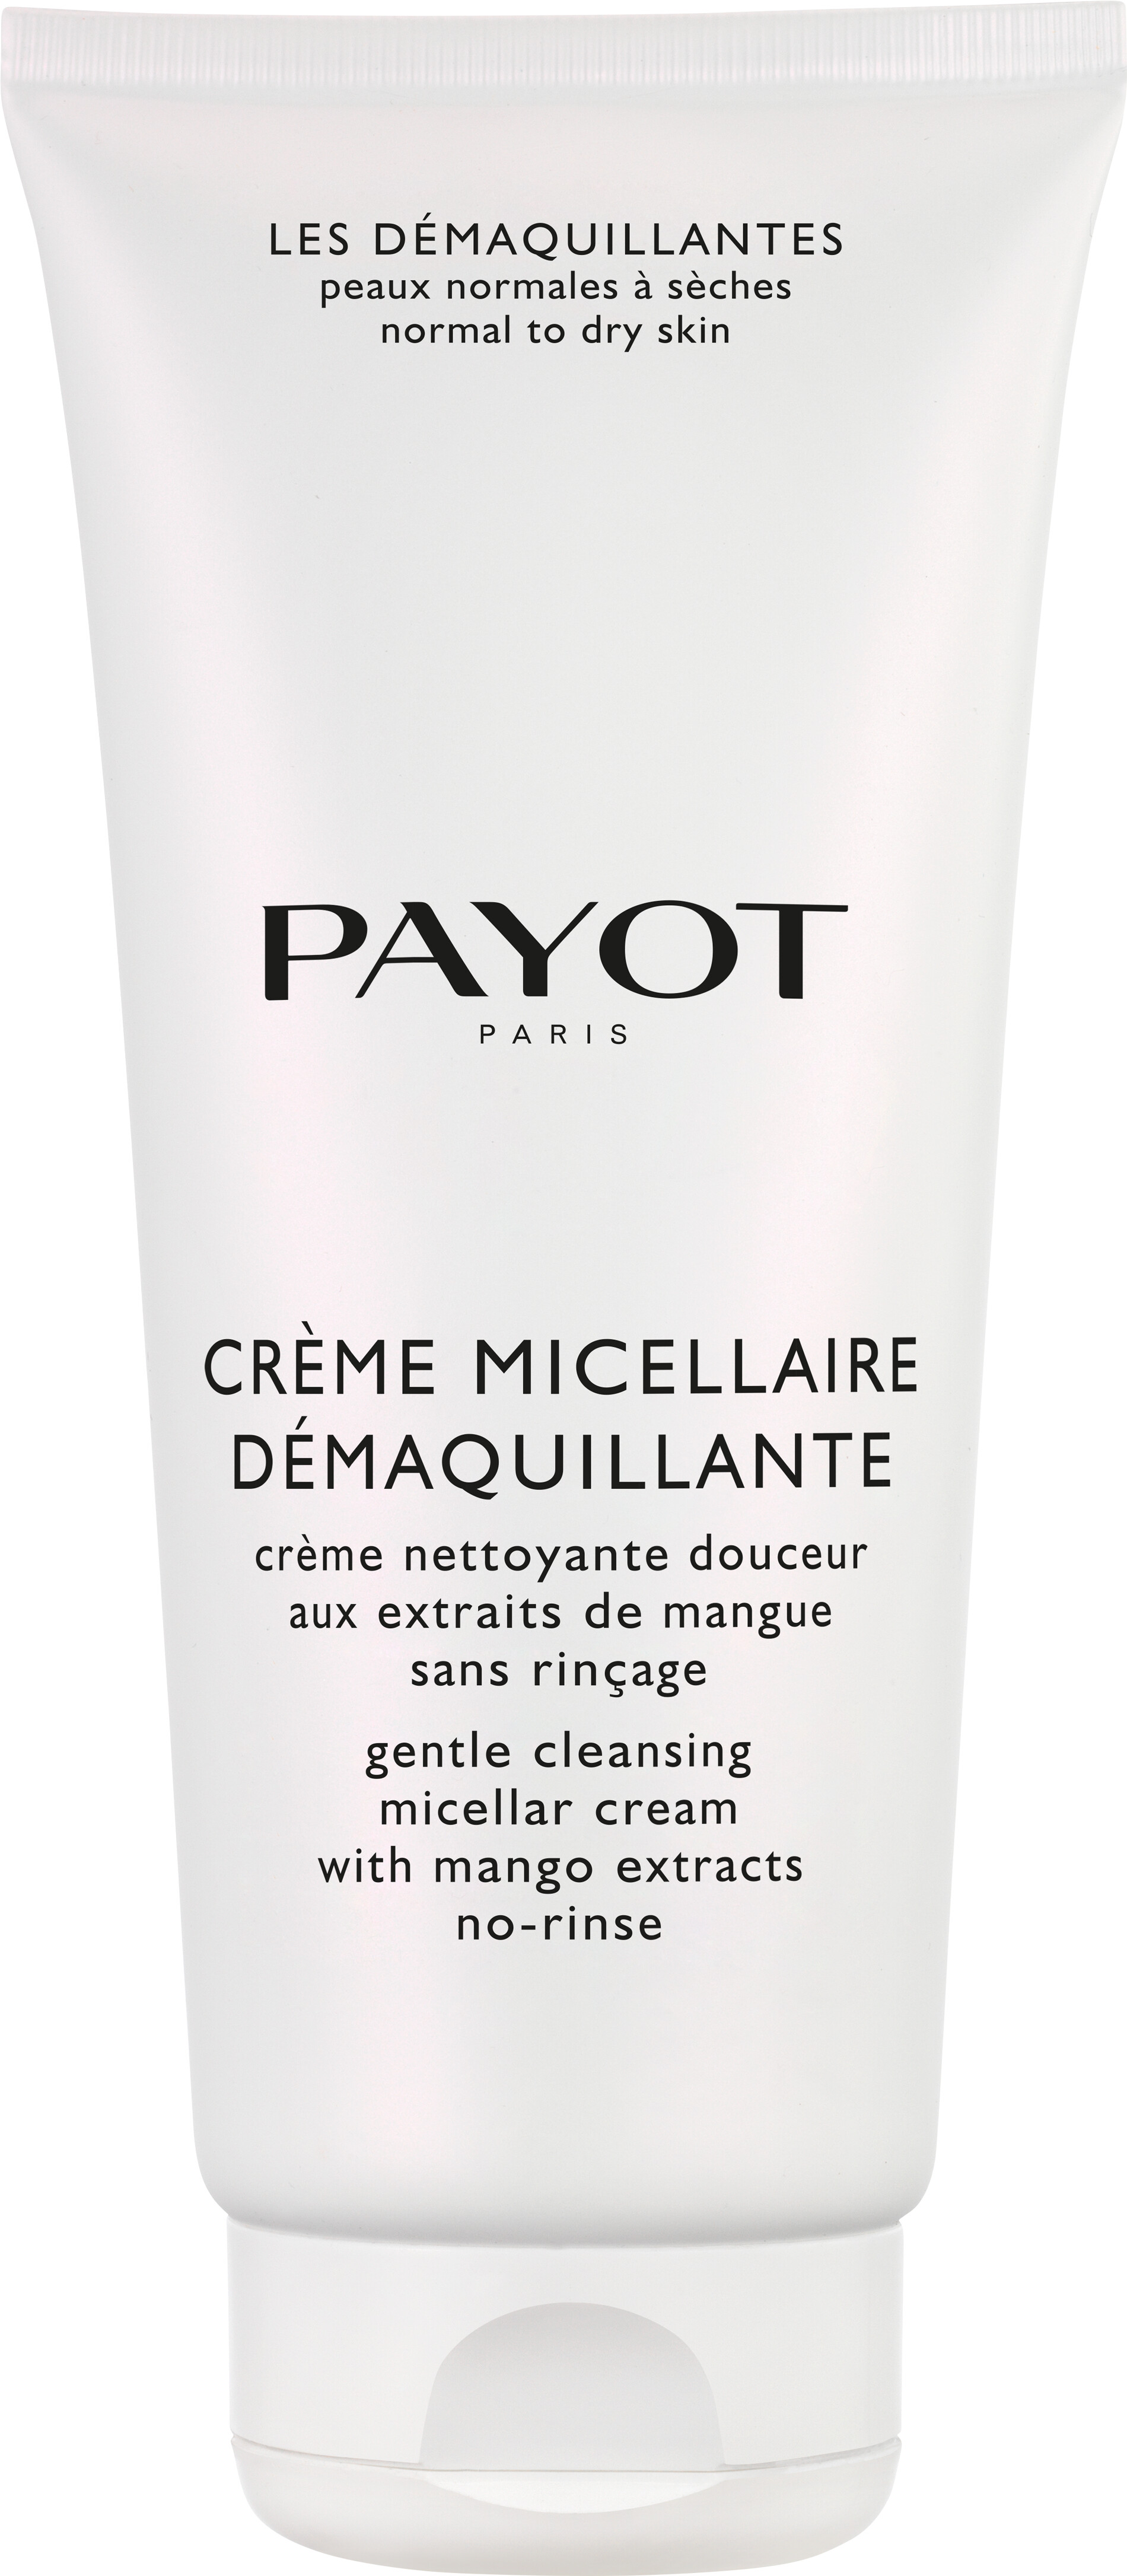 PAYOT Crème Micellaire Démaquillante - Gentle Cleansing Micellar Cream 200ml